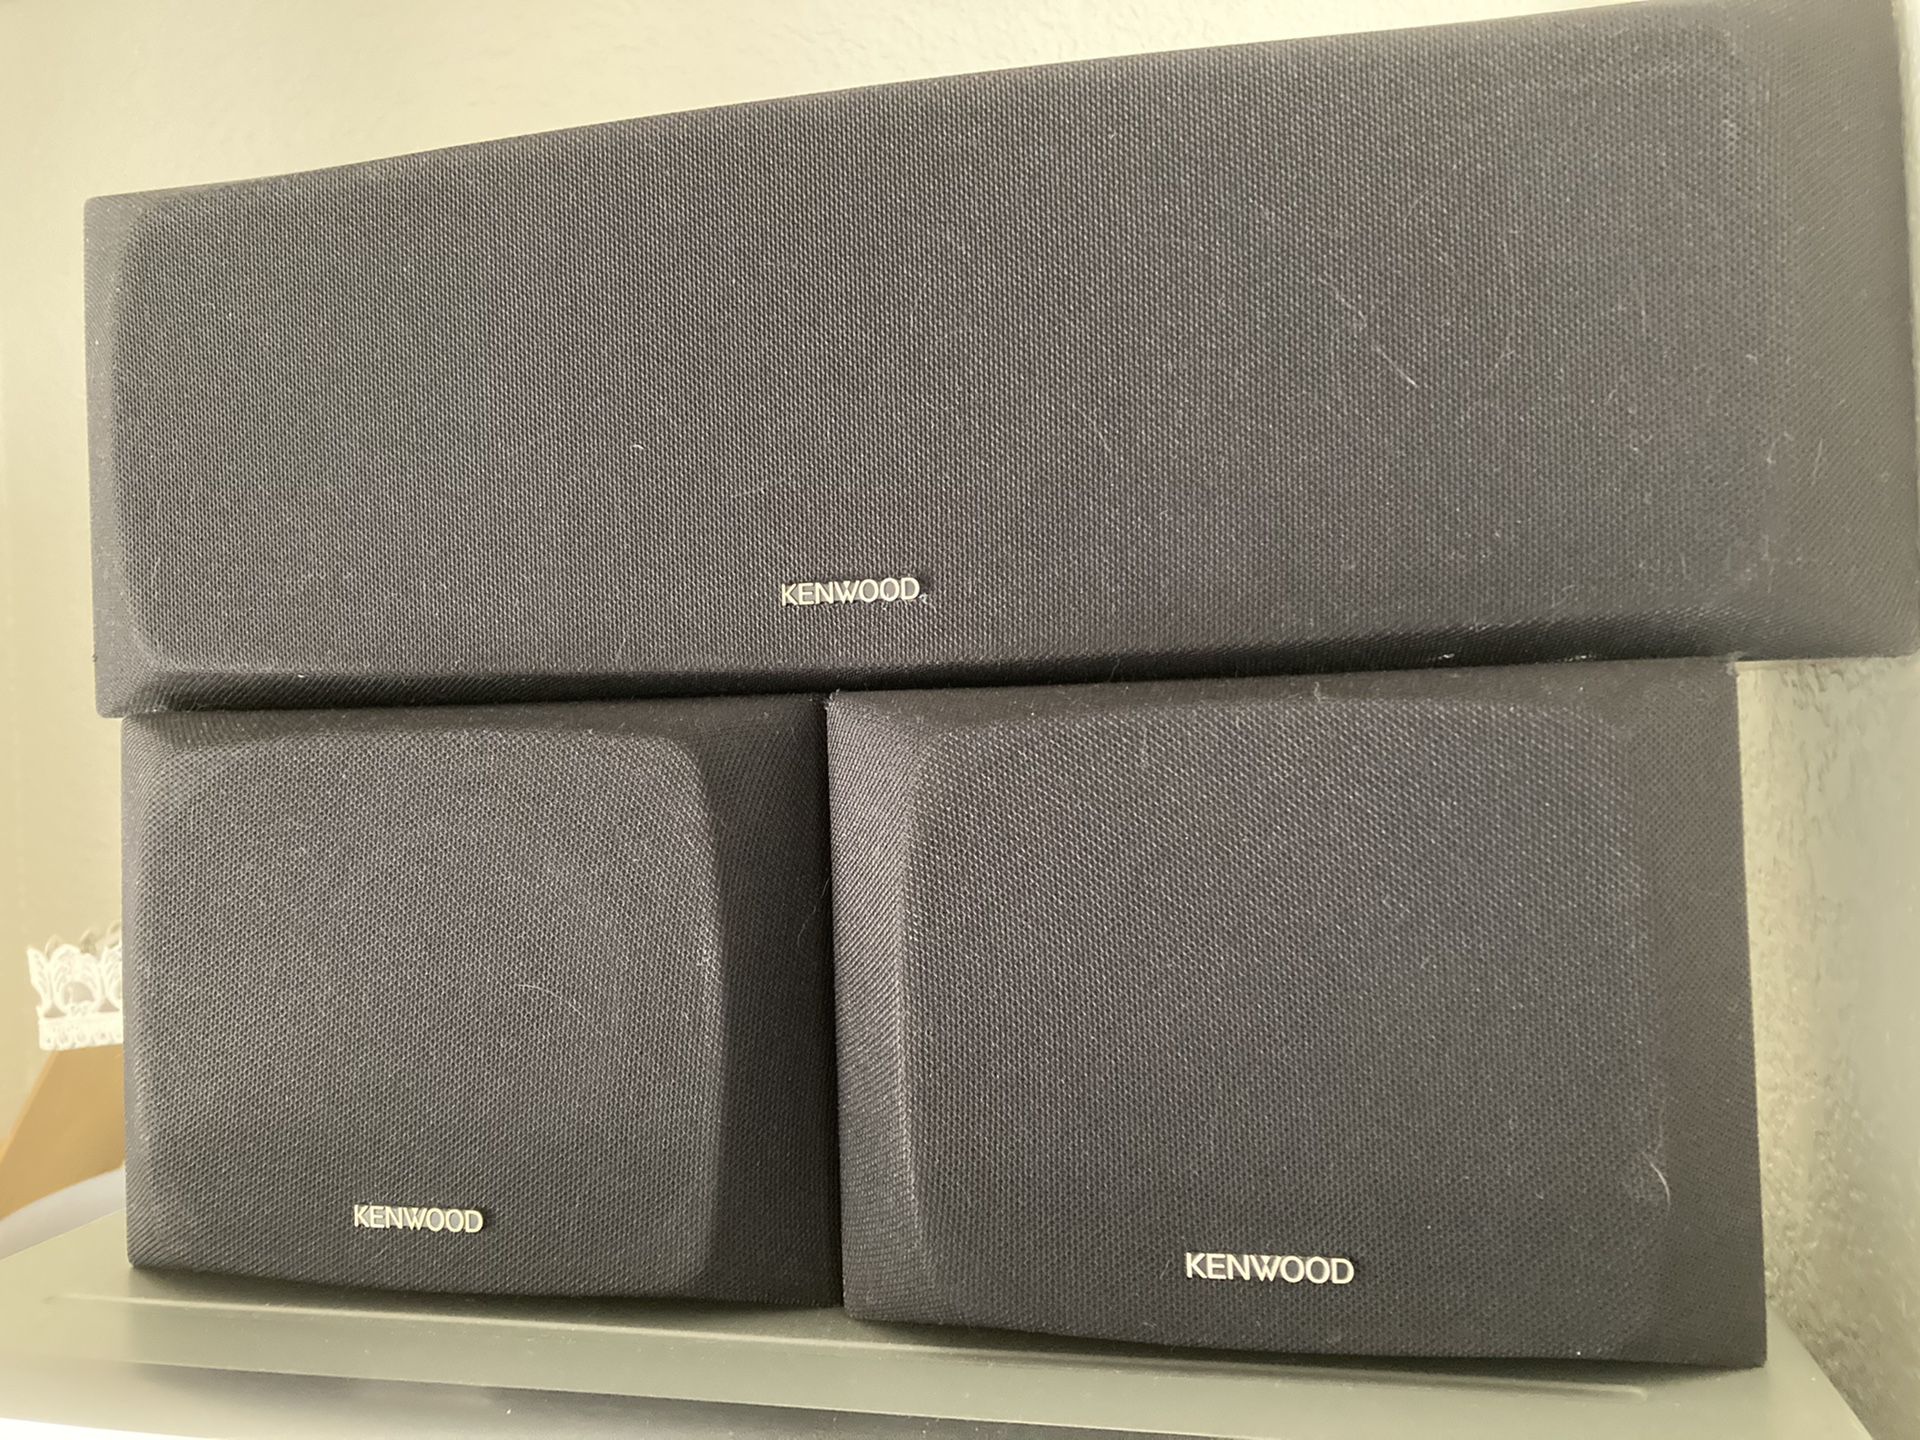 Very Nice Kenwood Stereo System